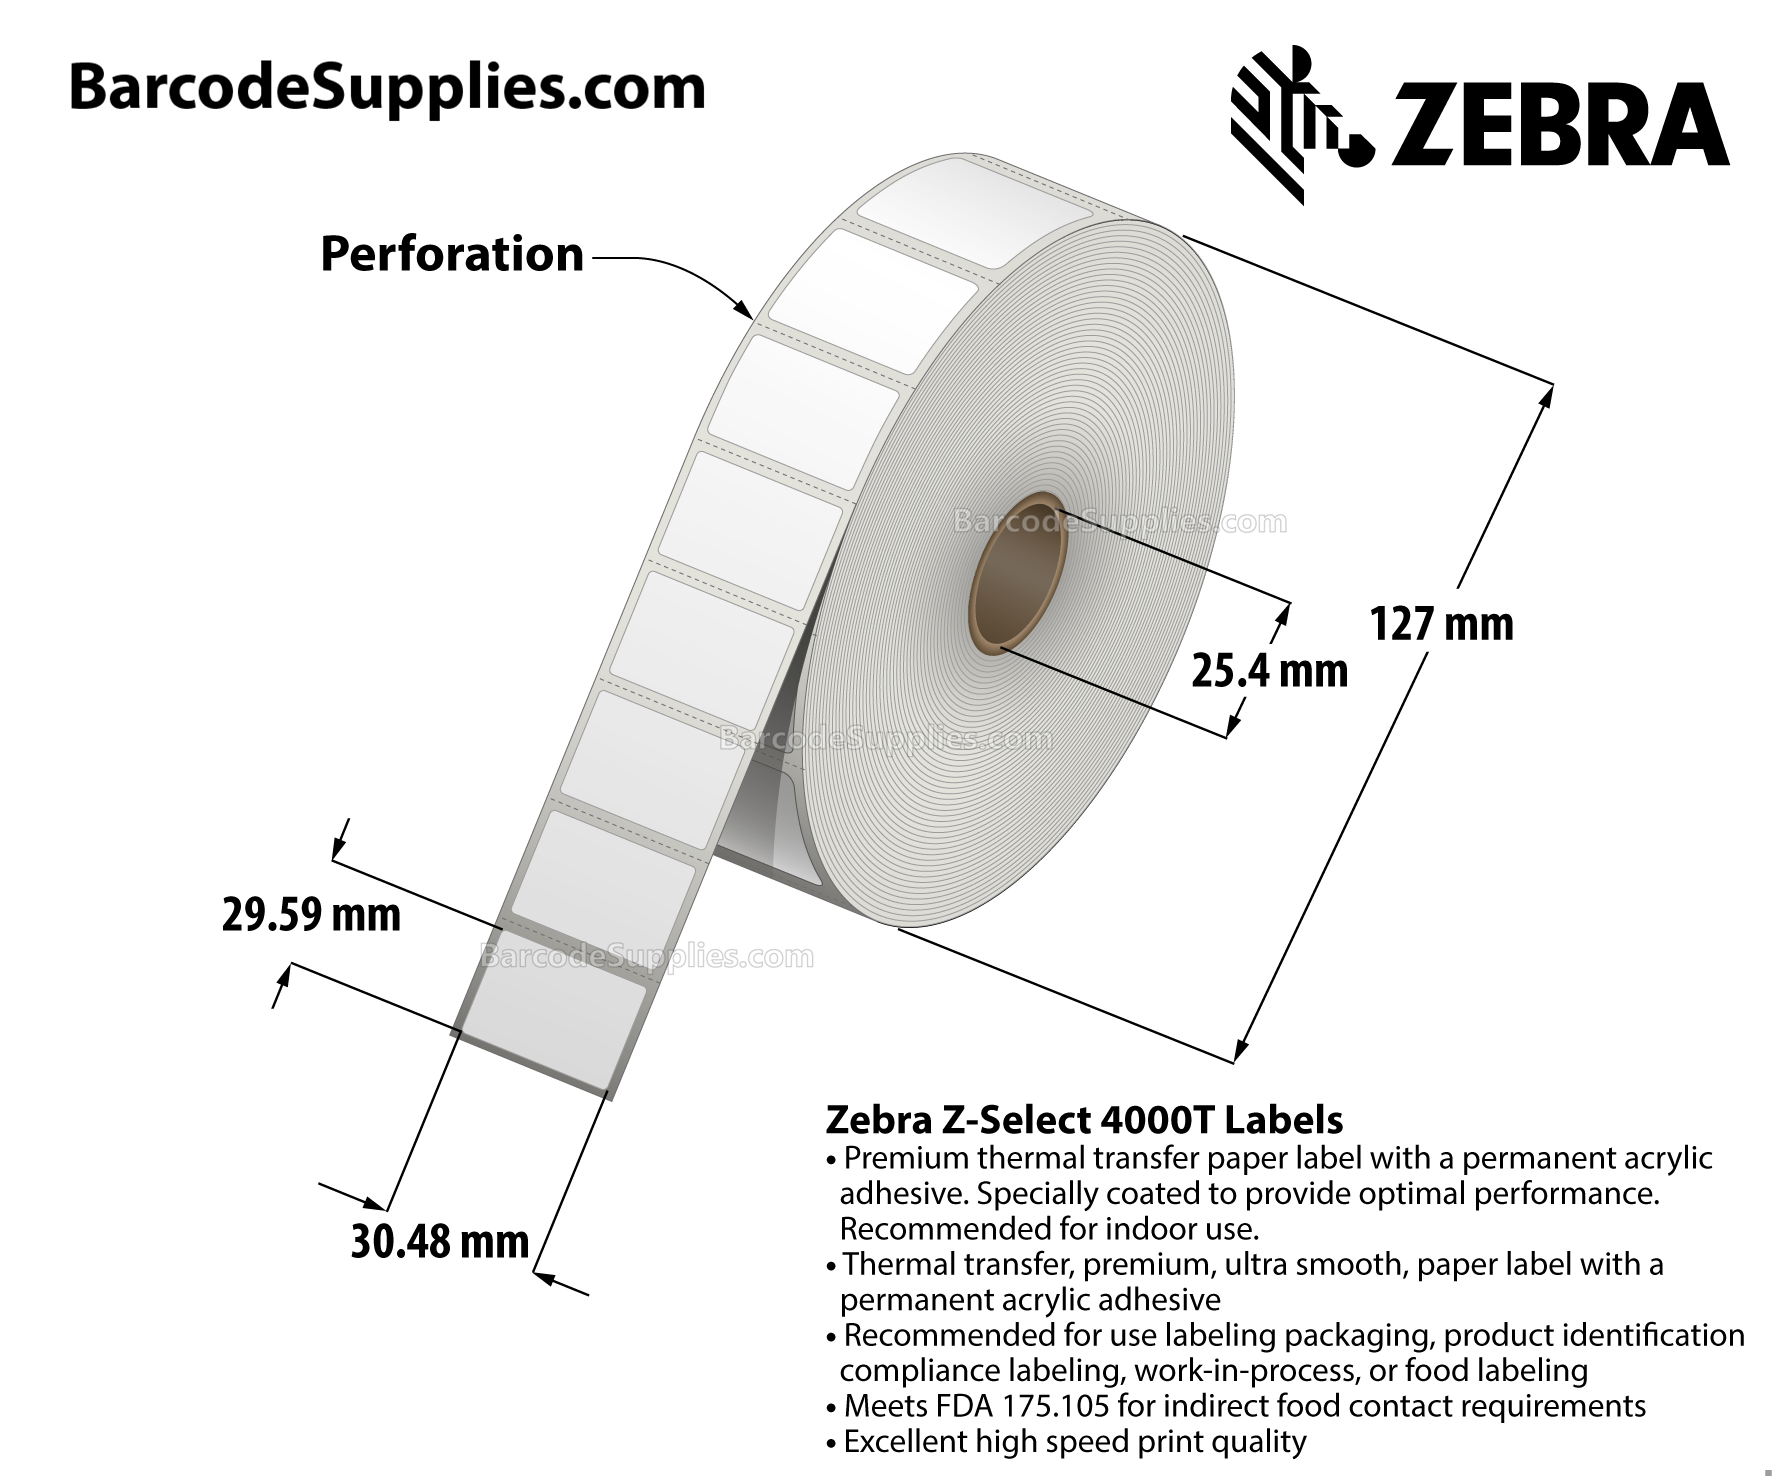 1.2 x 0.85 Thermal Transfer White Z-Select 4000T Labels With Permanent Adhesive - Perforated - 3000 Labels Per Roll - Carton Of 6 Rolls - 18000 Labels Total - MPN: 10009522